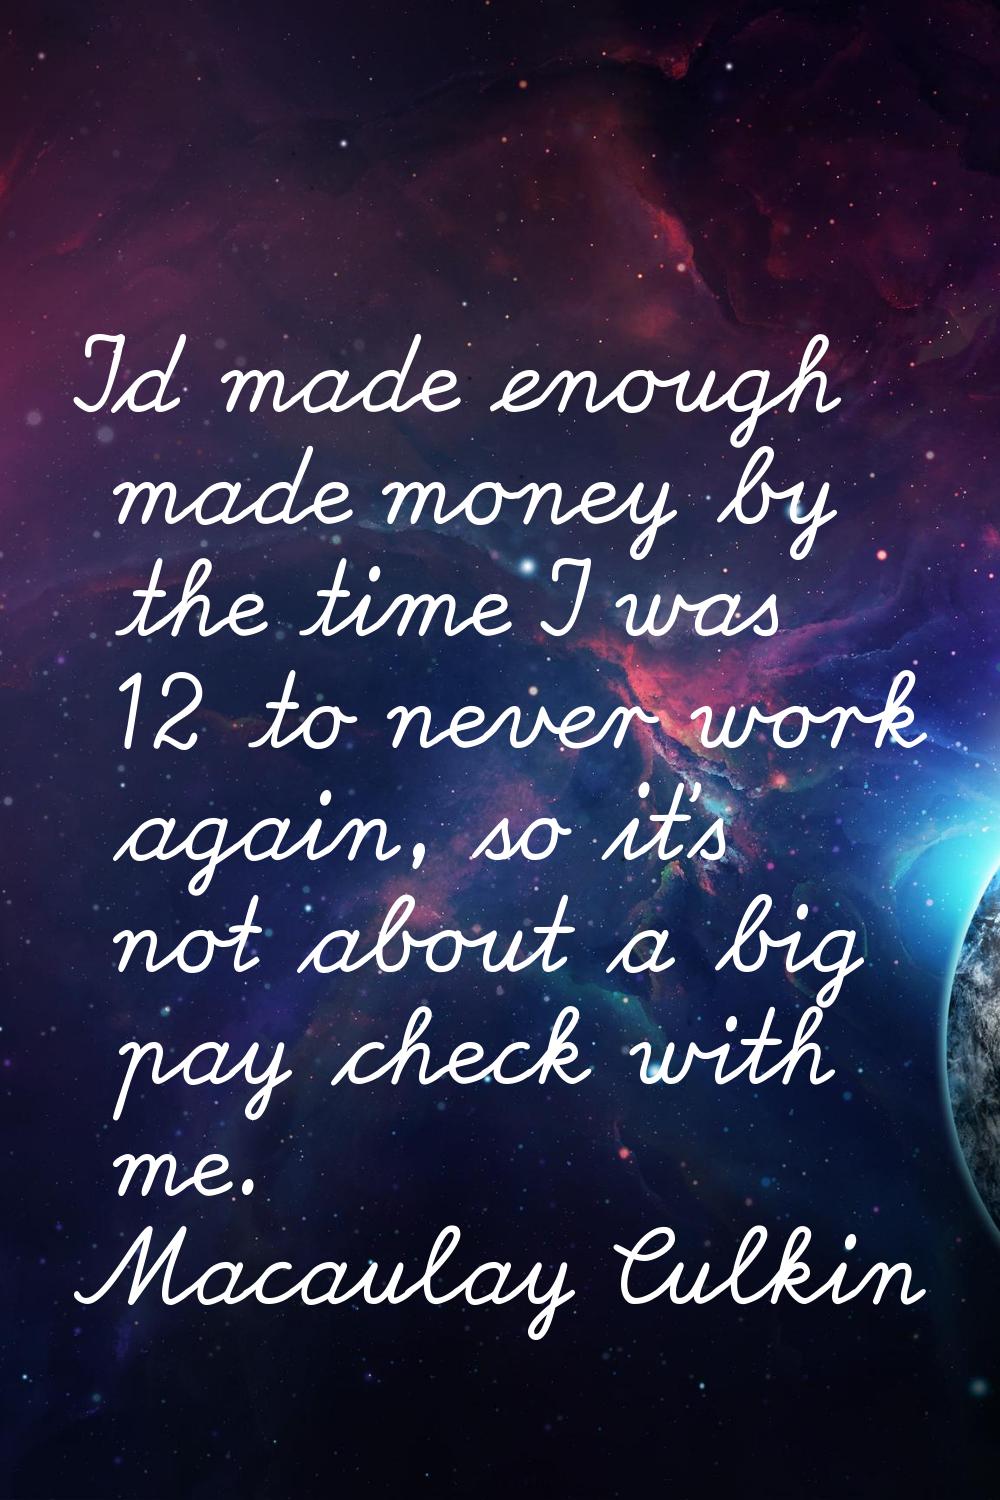 I'd made enough made money by the time I was 12 to never work again, so it's not about a big pay ch